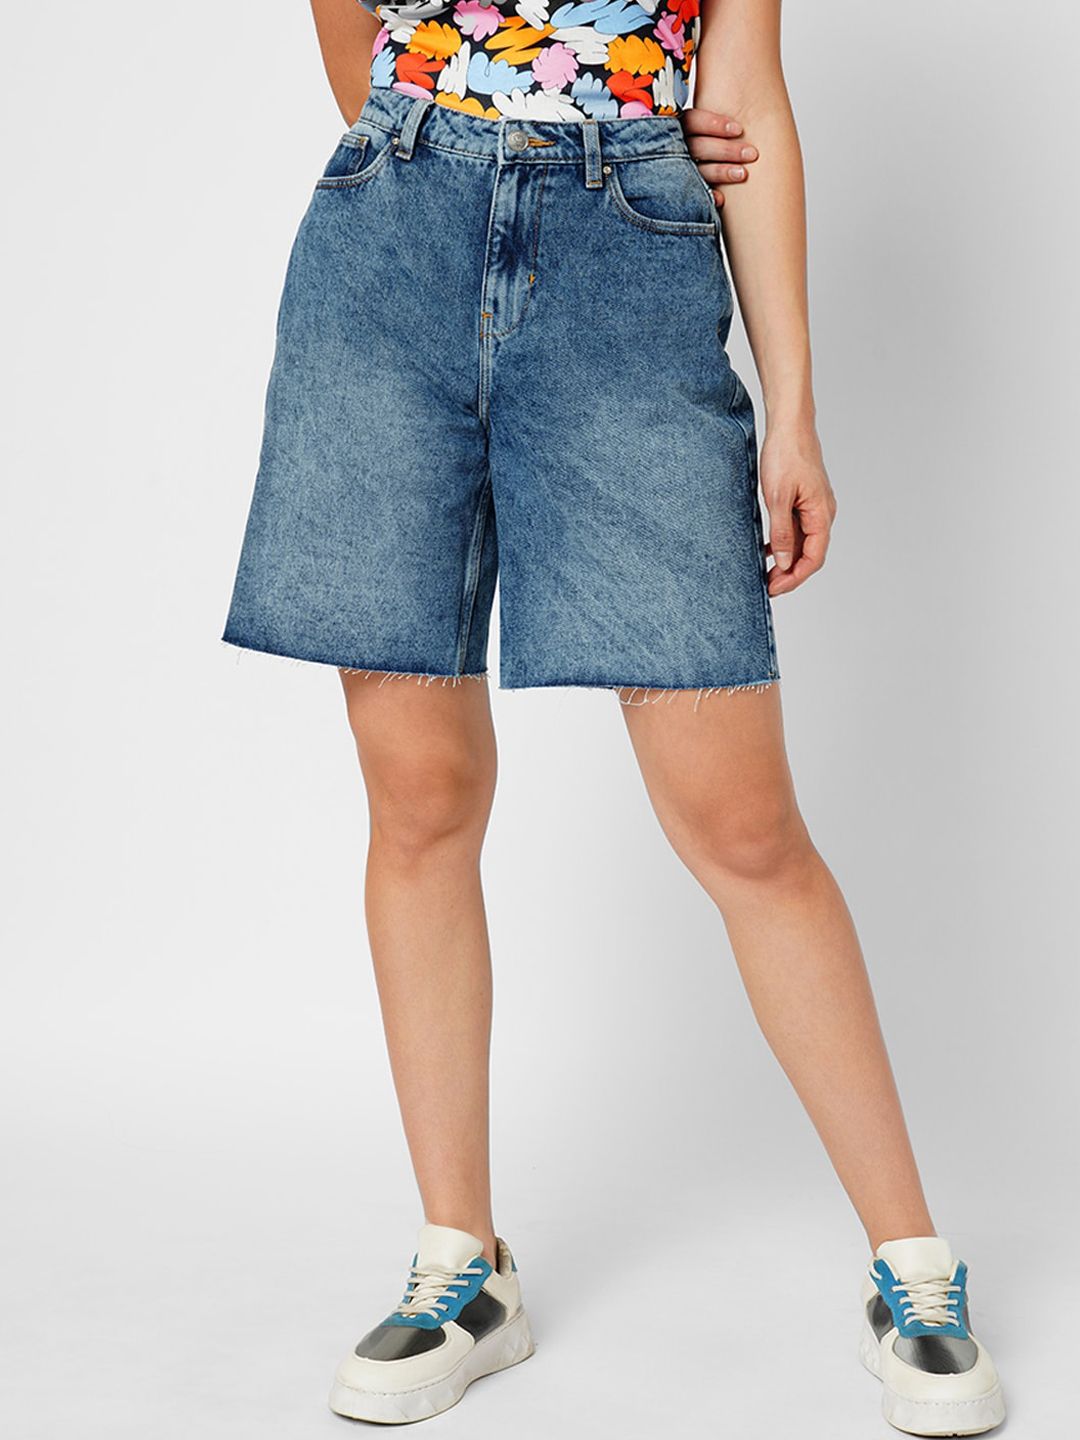 ONLY Women Washed High-Rise Pure Cotton Denim Shorts Price in India